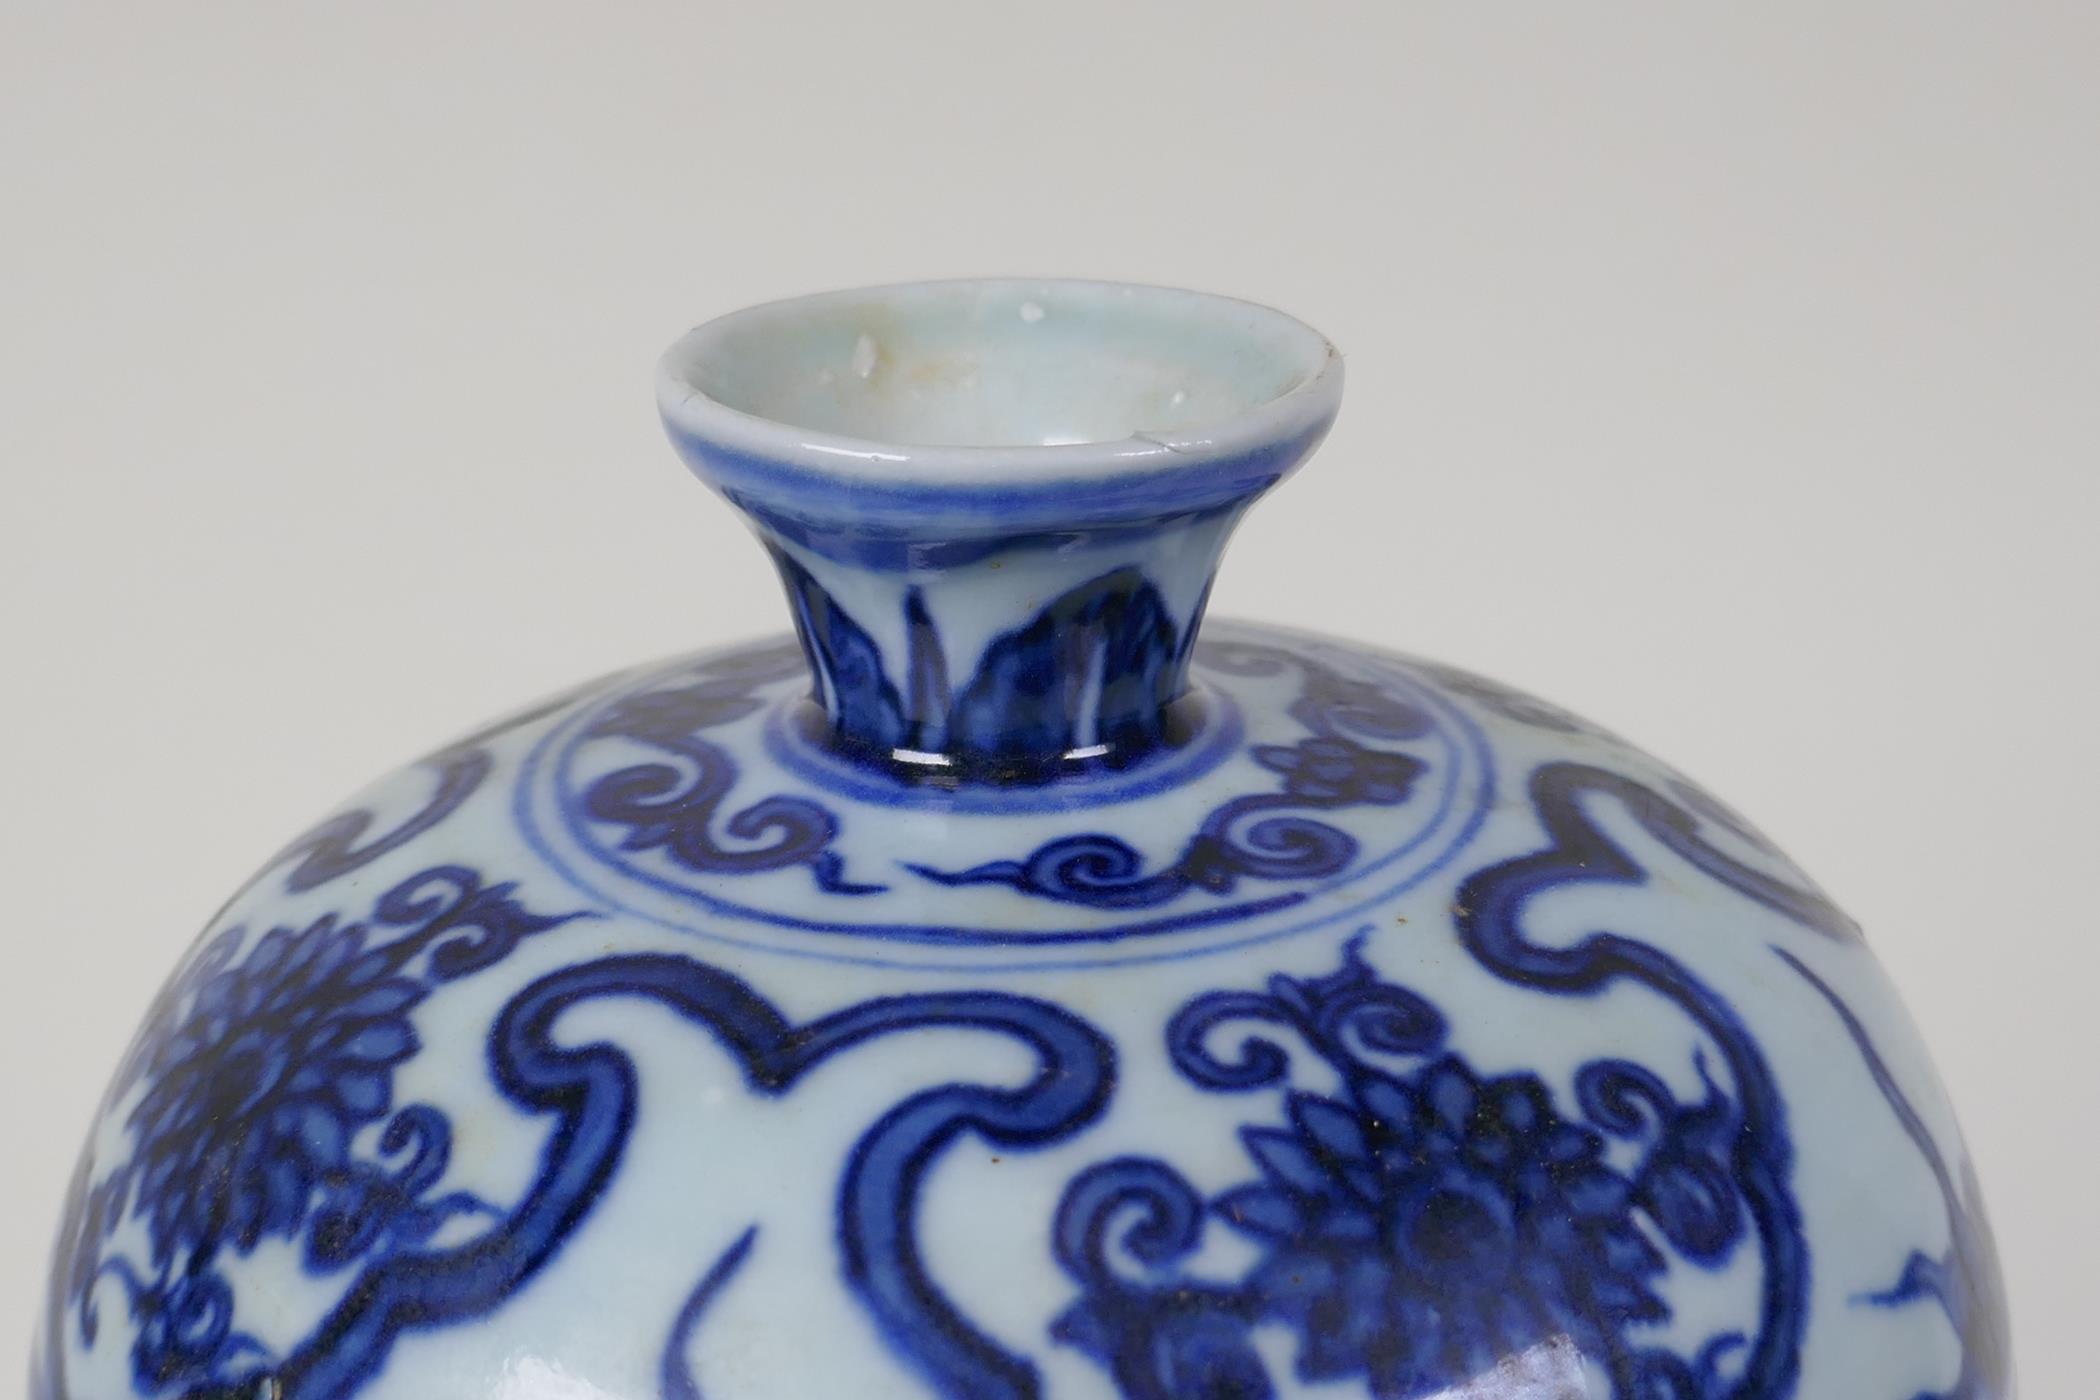 A Chinese ming style blue and white porcelain vase with scrolling lotus flower pattern, 11½" high - Image 7 of 8